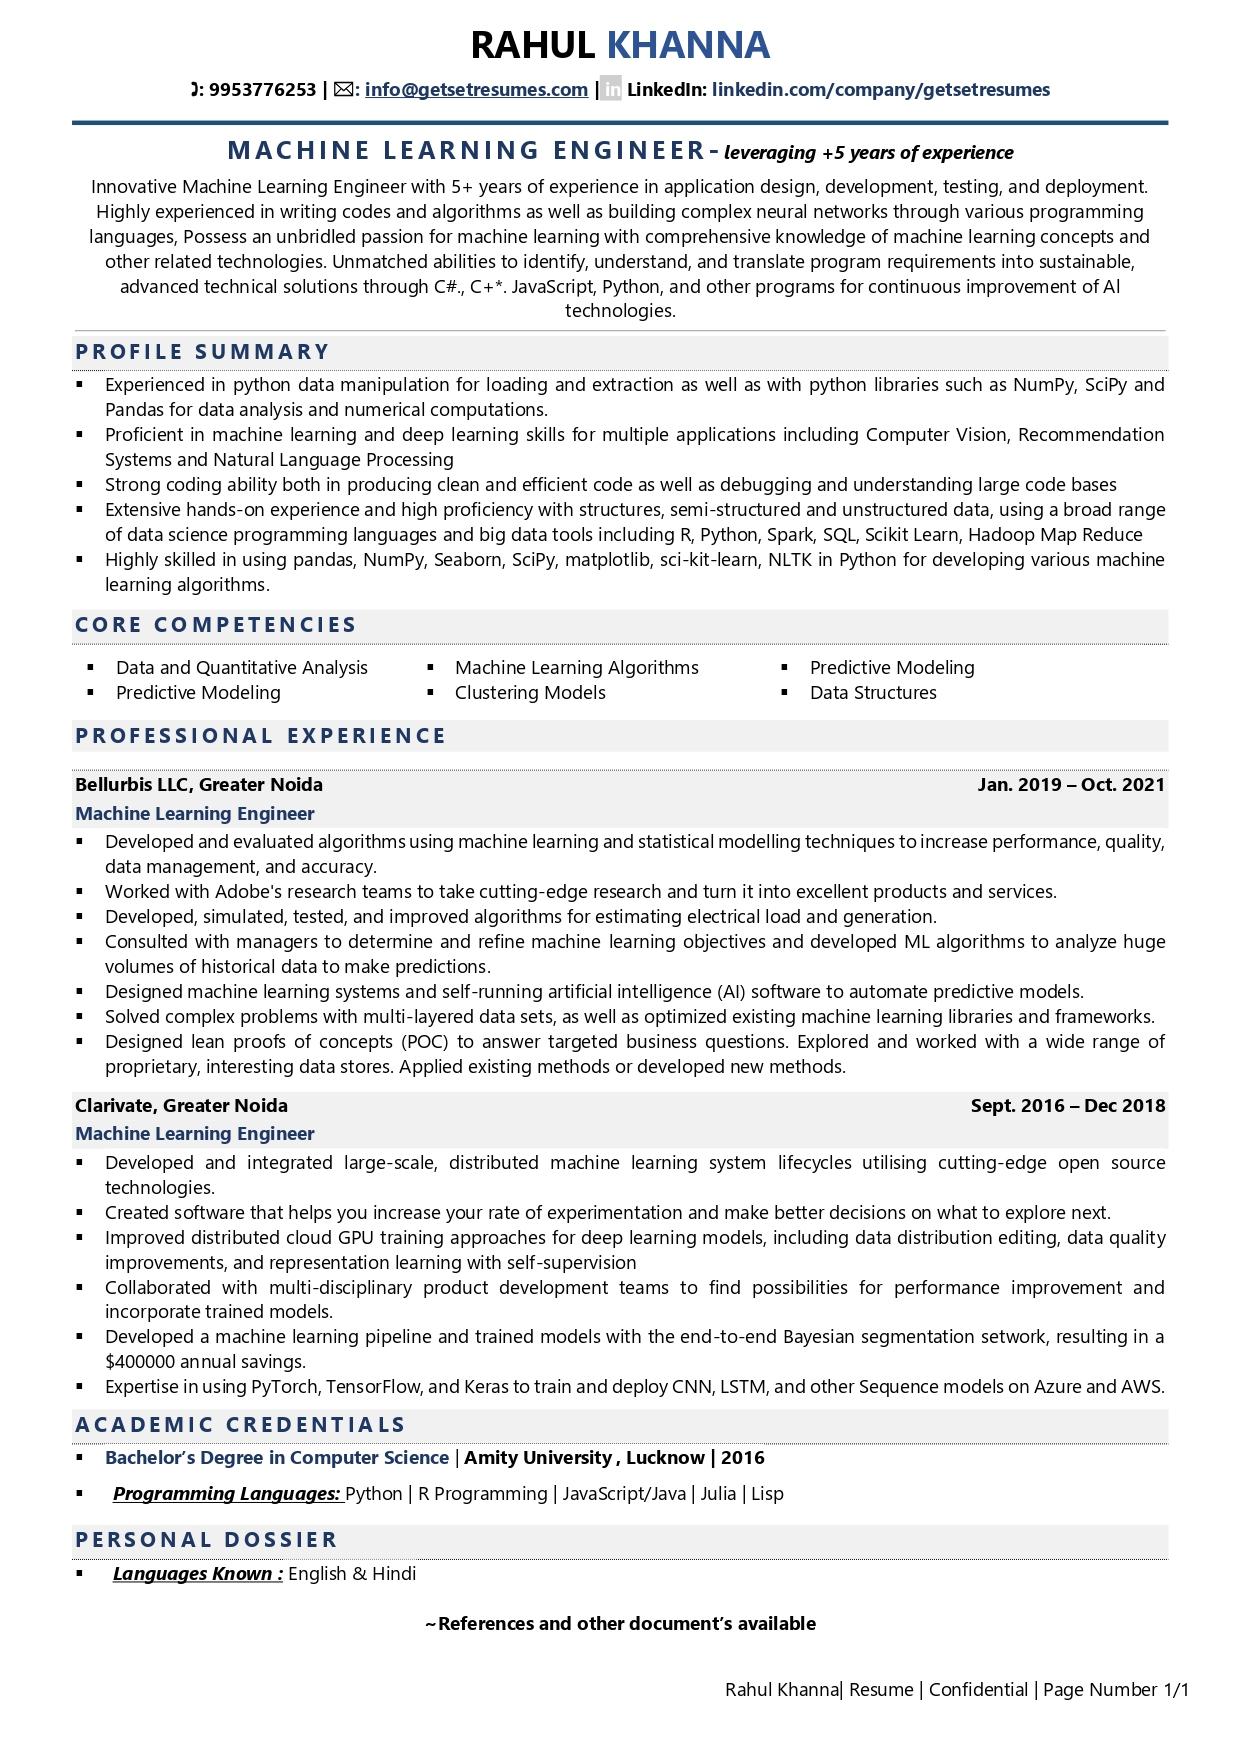 Machine Learning Engineer - Resume Example & Template